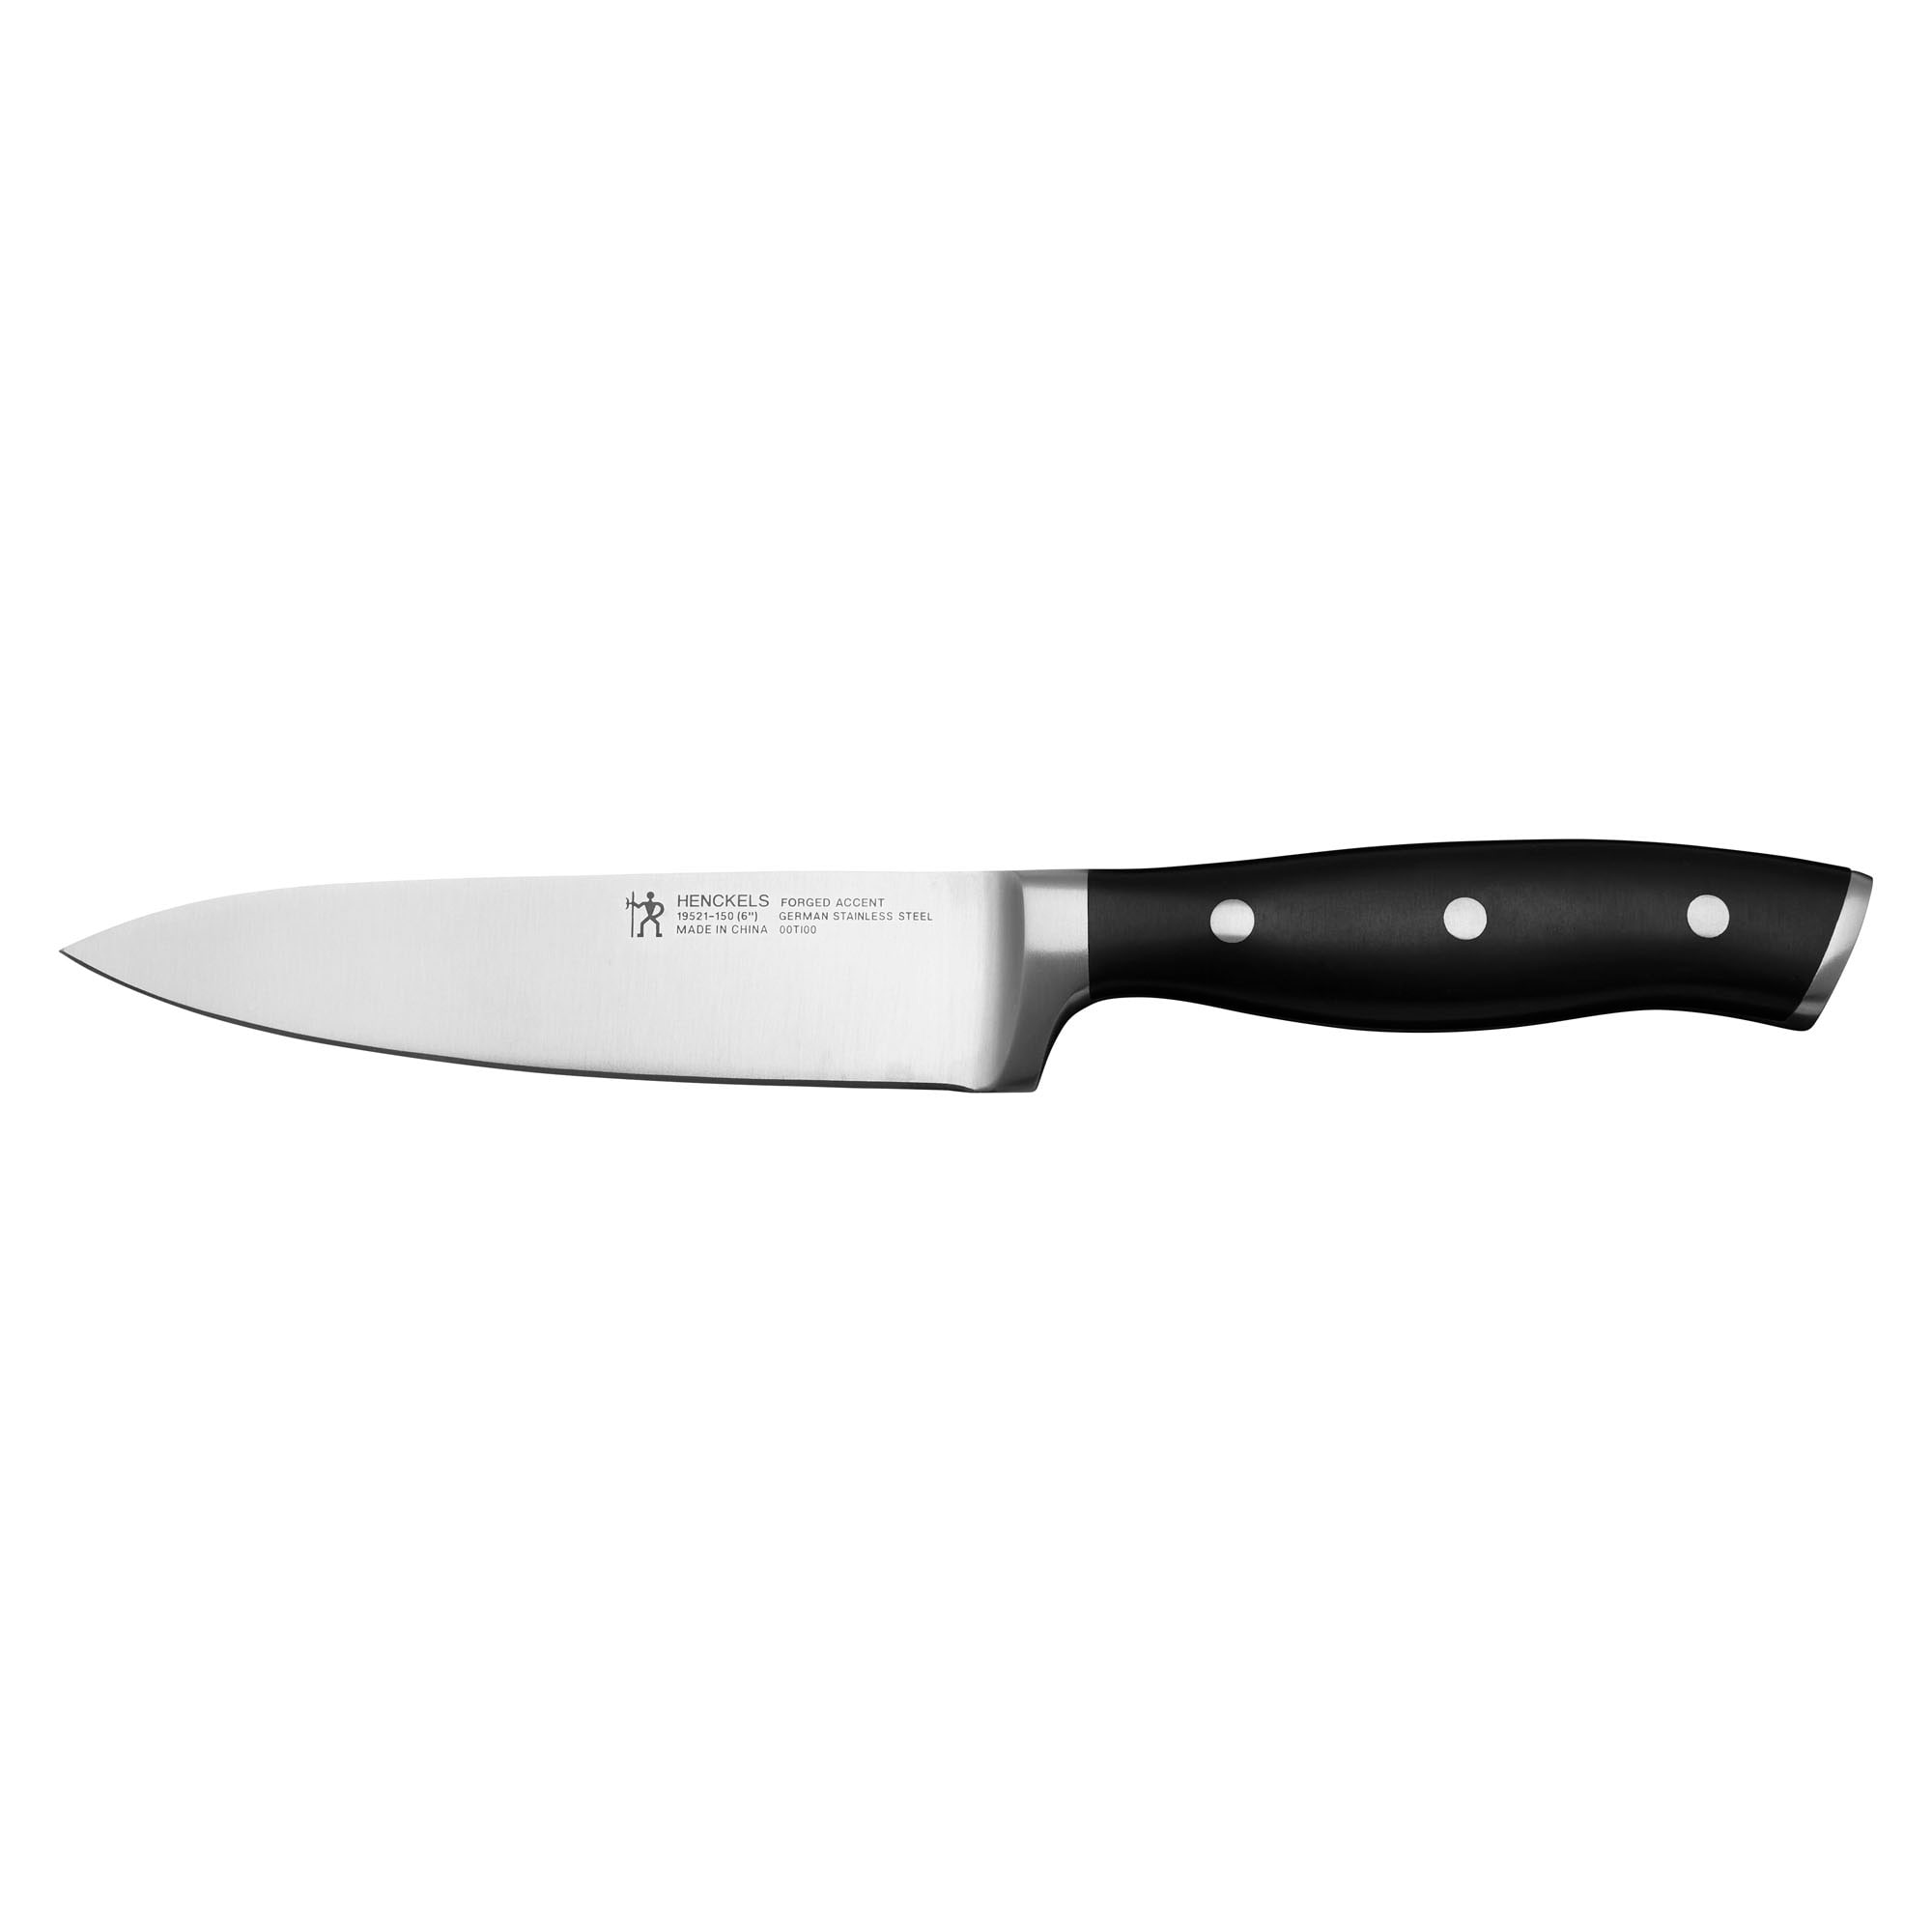 https://ak1.ostkcdn.com/images/products/is/images/direct/65524307c573dde8c435191199a8f497eface95d/Henckels-Forged-Accent-6-pc-Travel-Knife-Set.jpg